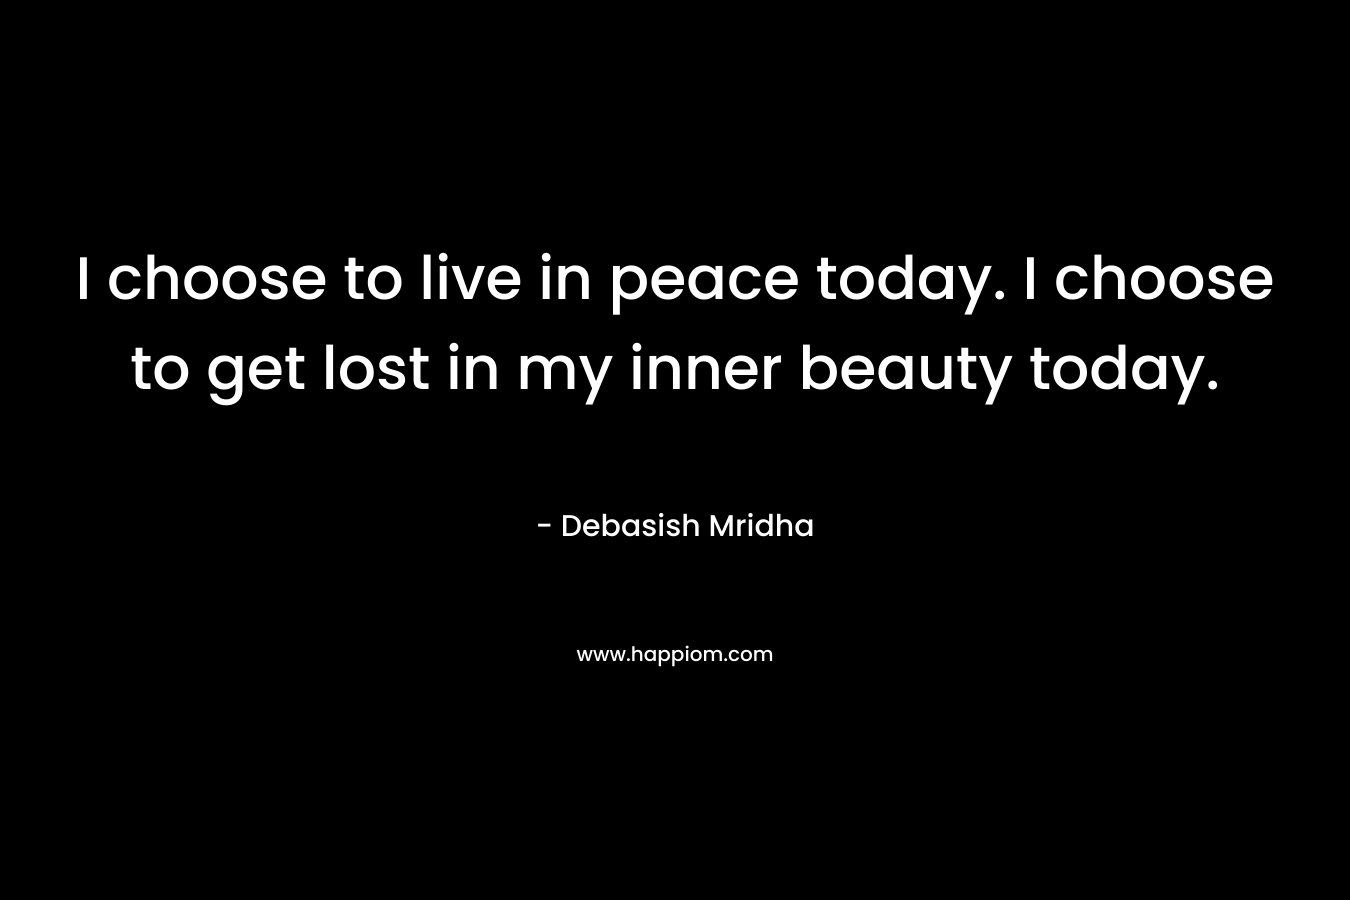 I choose to live in peace today. I choose to get lost in my inner beauty today.